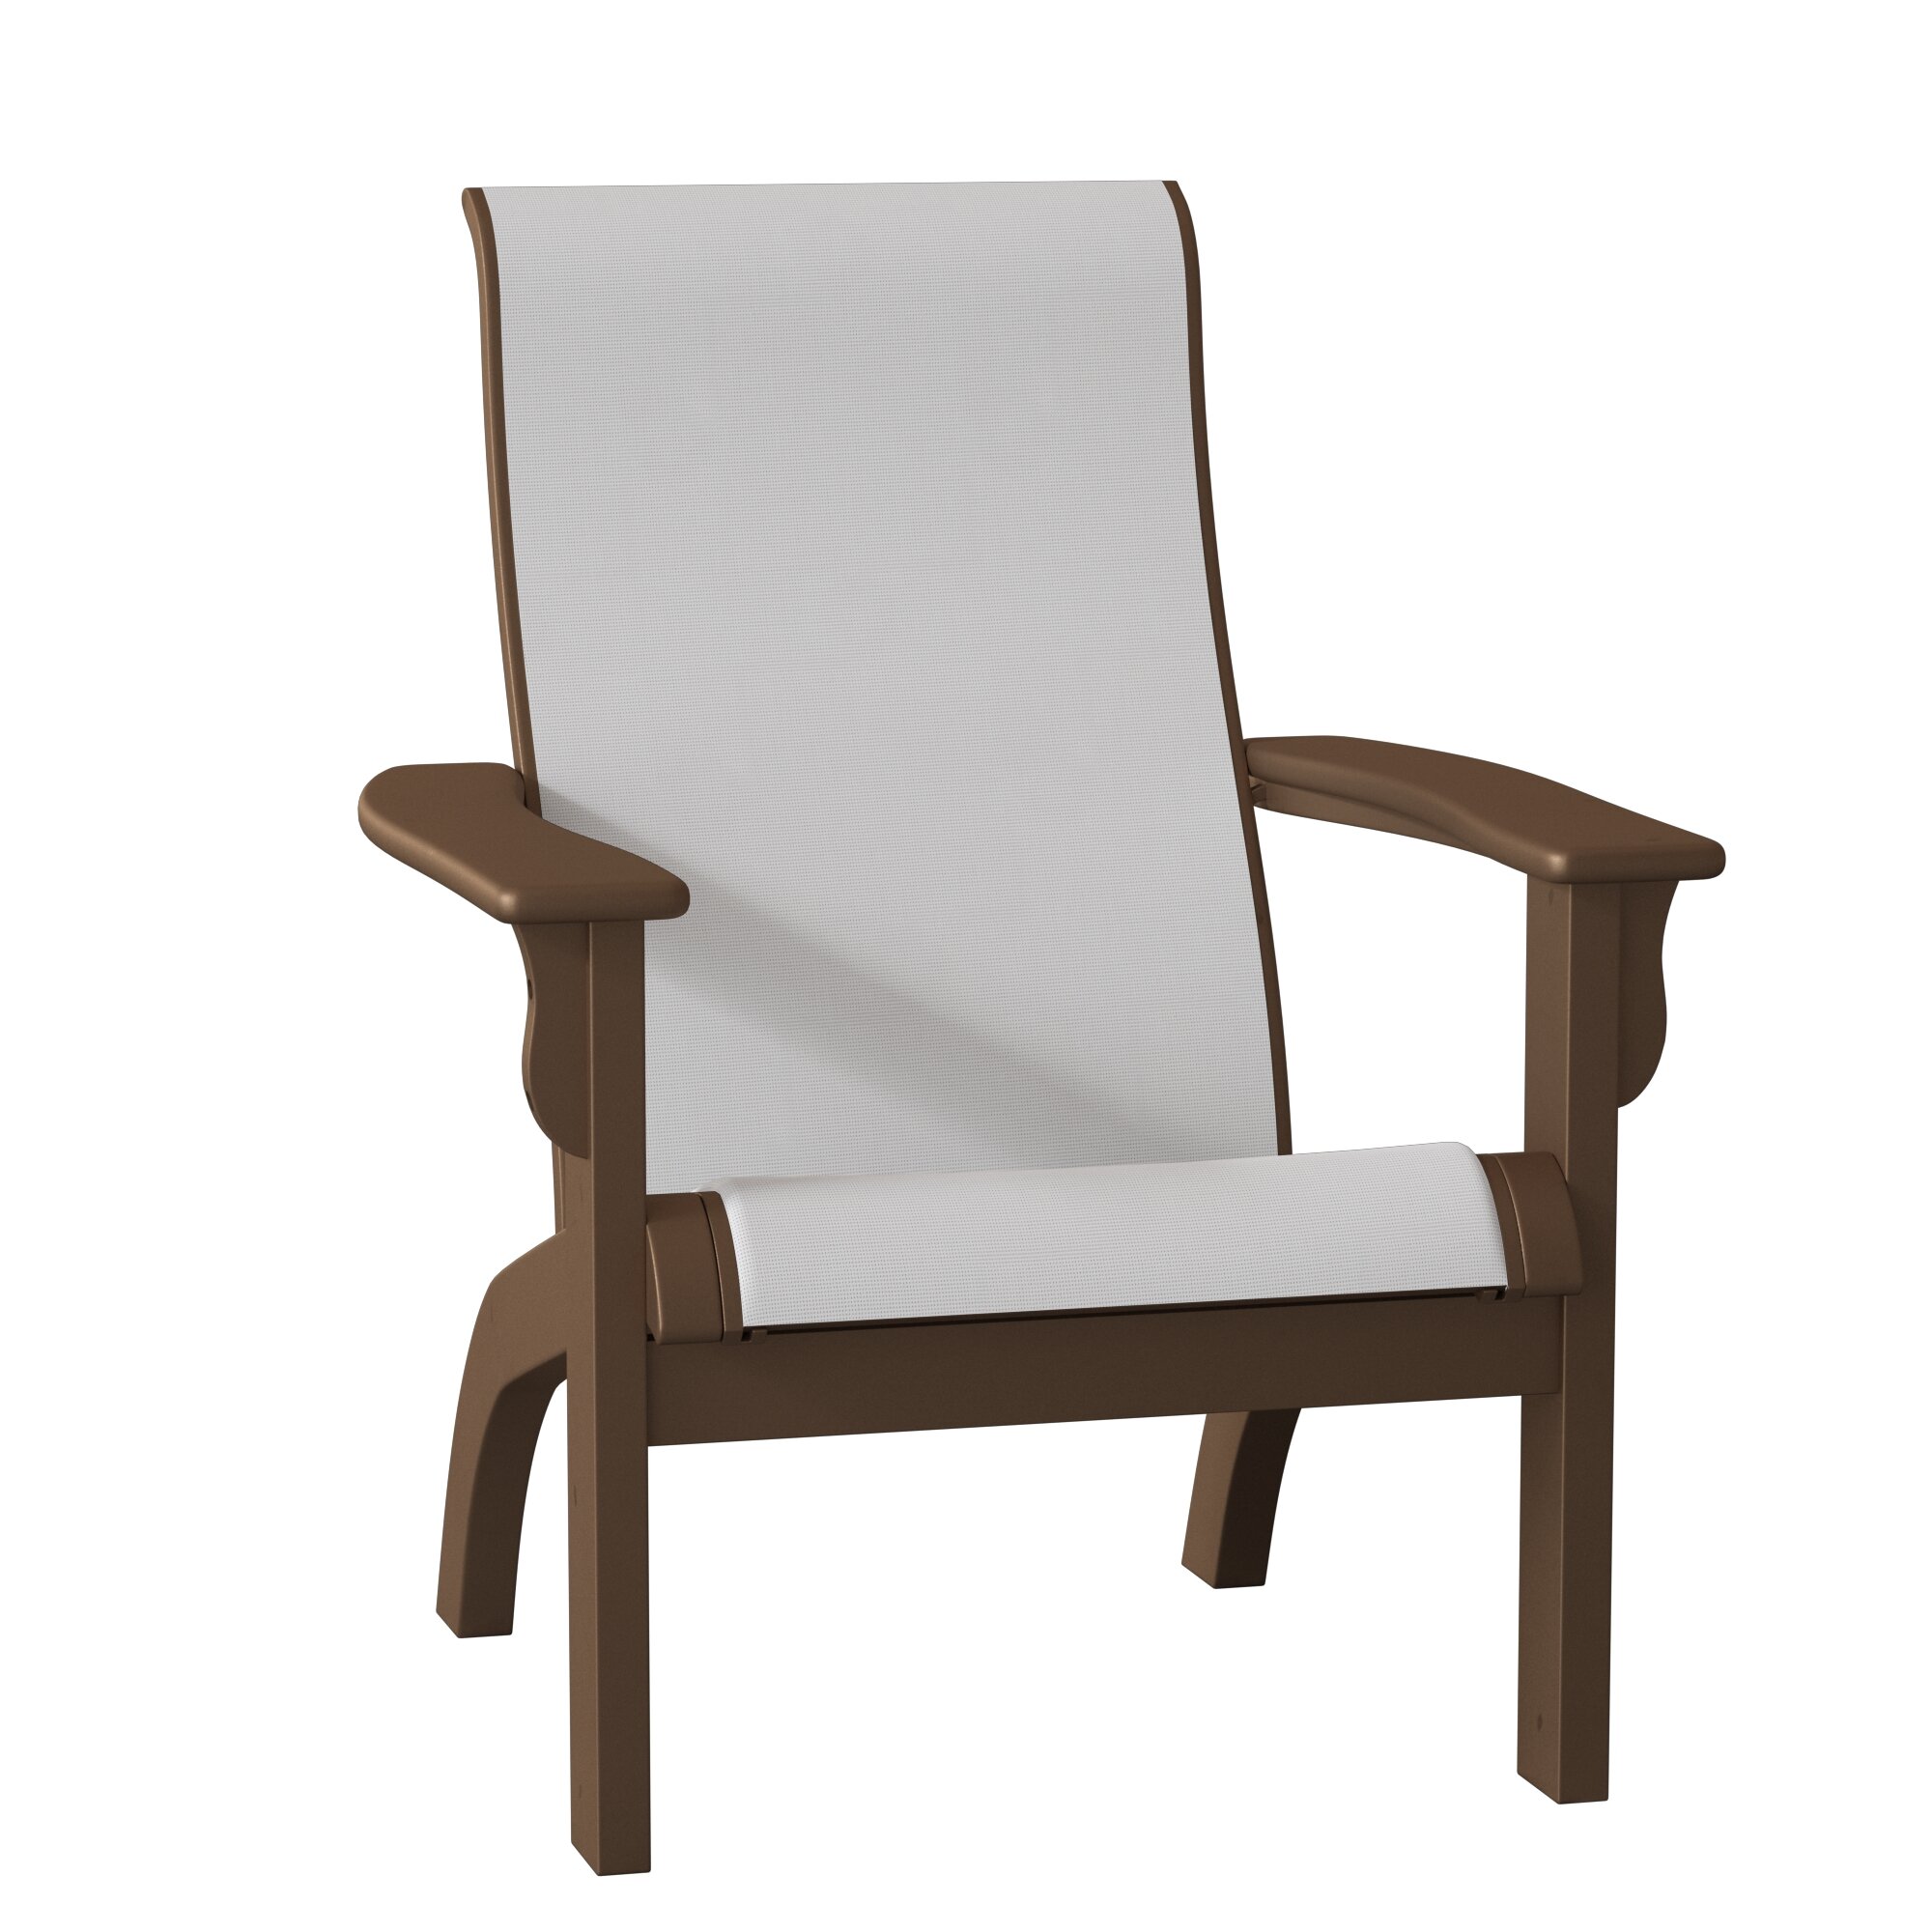 Textured Snow Finish with Lime Sling Fabric Telescope Casual 9A7638D01 Adirondack MGP Sling Chair 